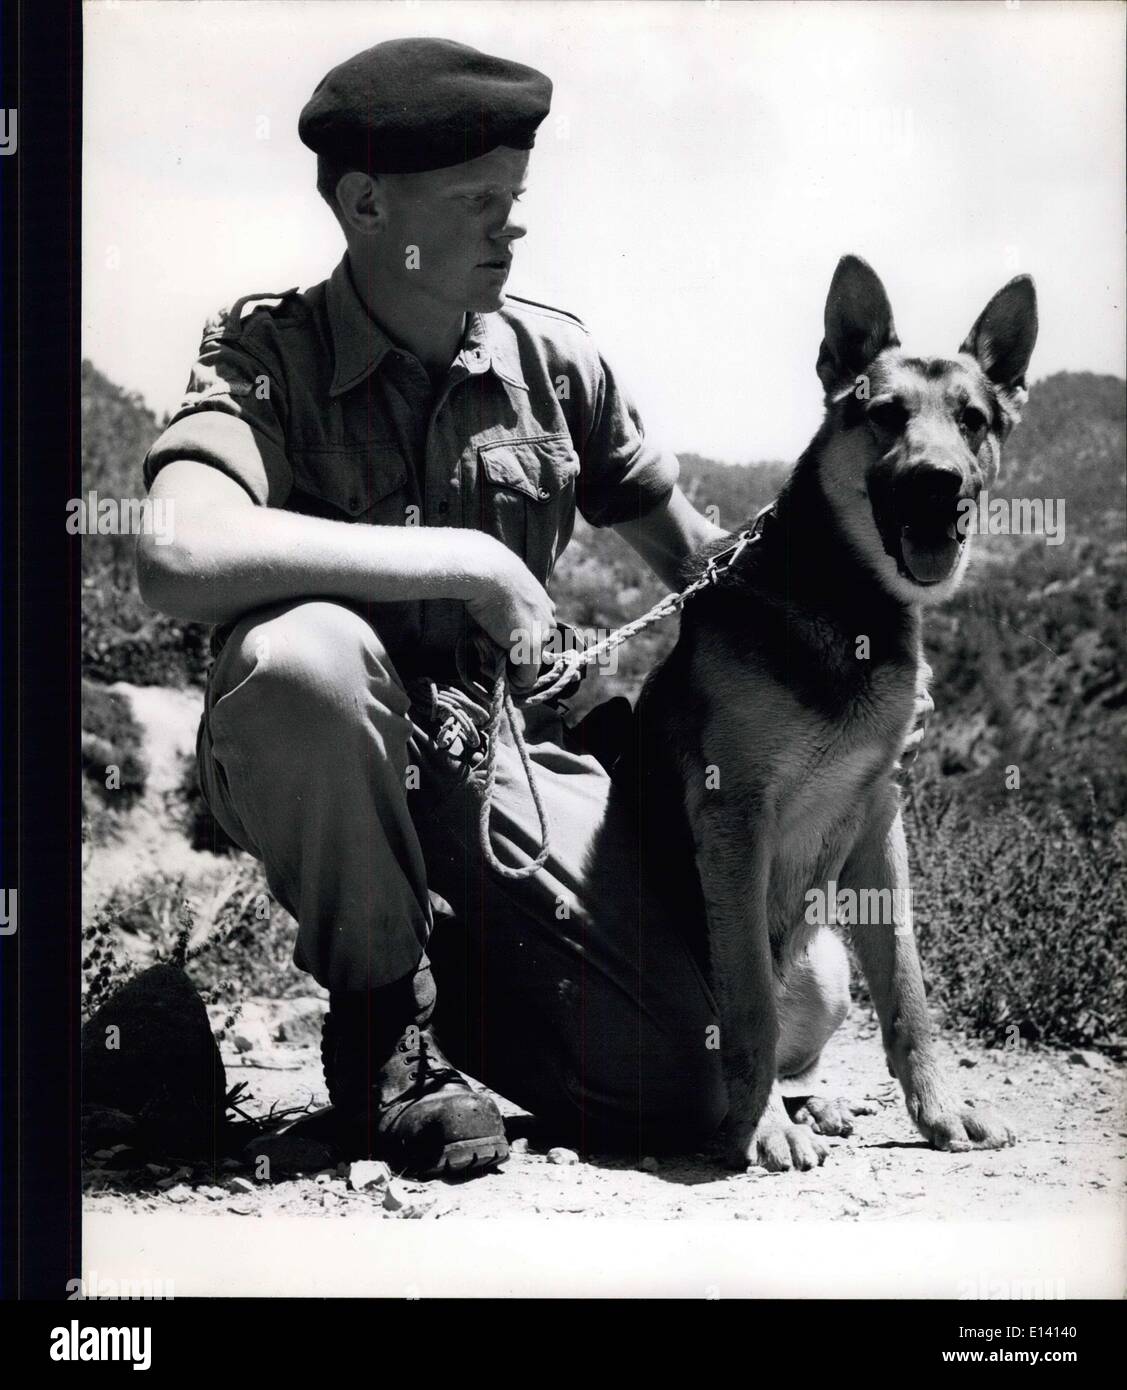 Mar. 31, 2012 - ''Hornet'' With The Troops In Cyprus: He is a tracker dog whoaco panies patrols in their searches or ''sweeps''. His handler is L/CPA Jerry Leeson Of the Royal army veterinary cors and he is attached to the Royal which fusiiers. Stock Photo